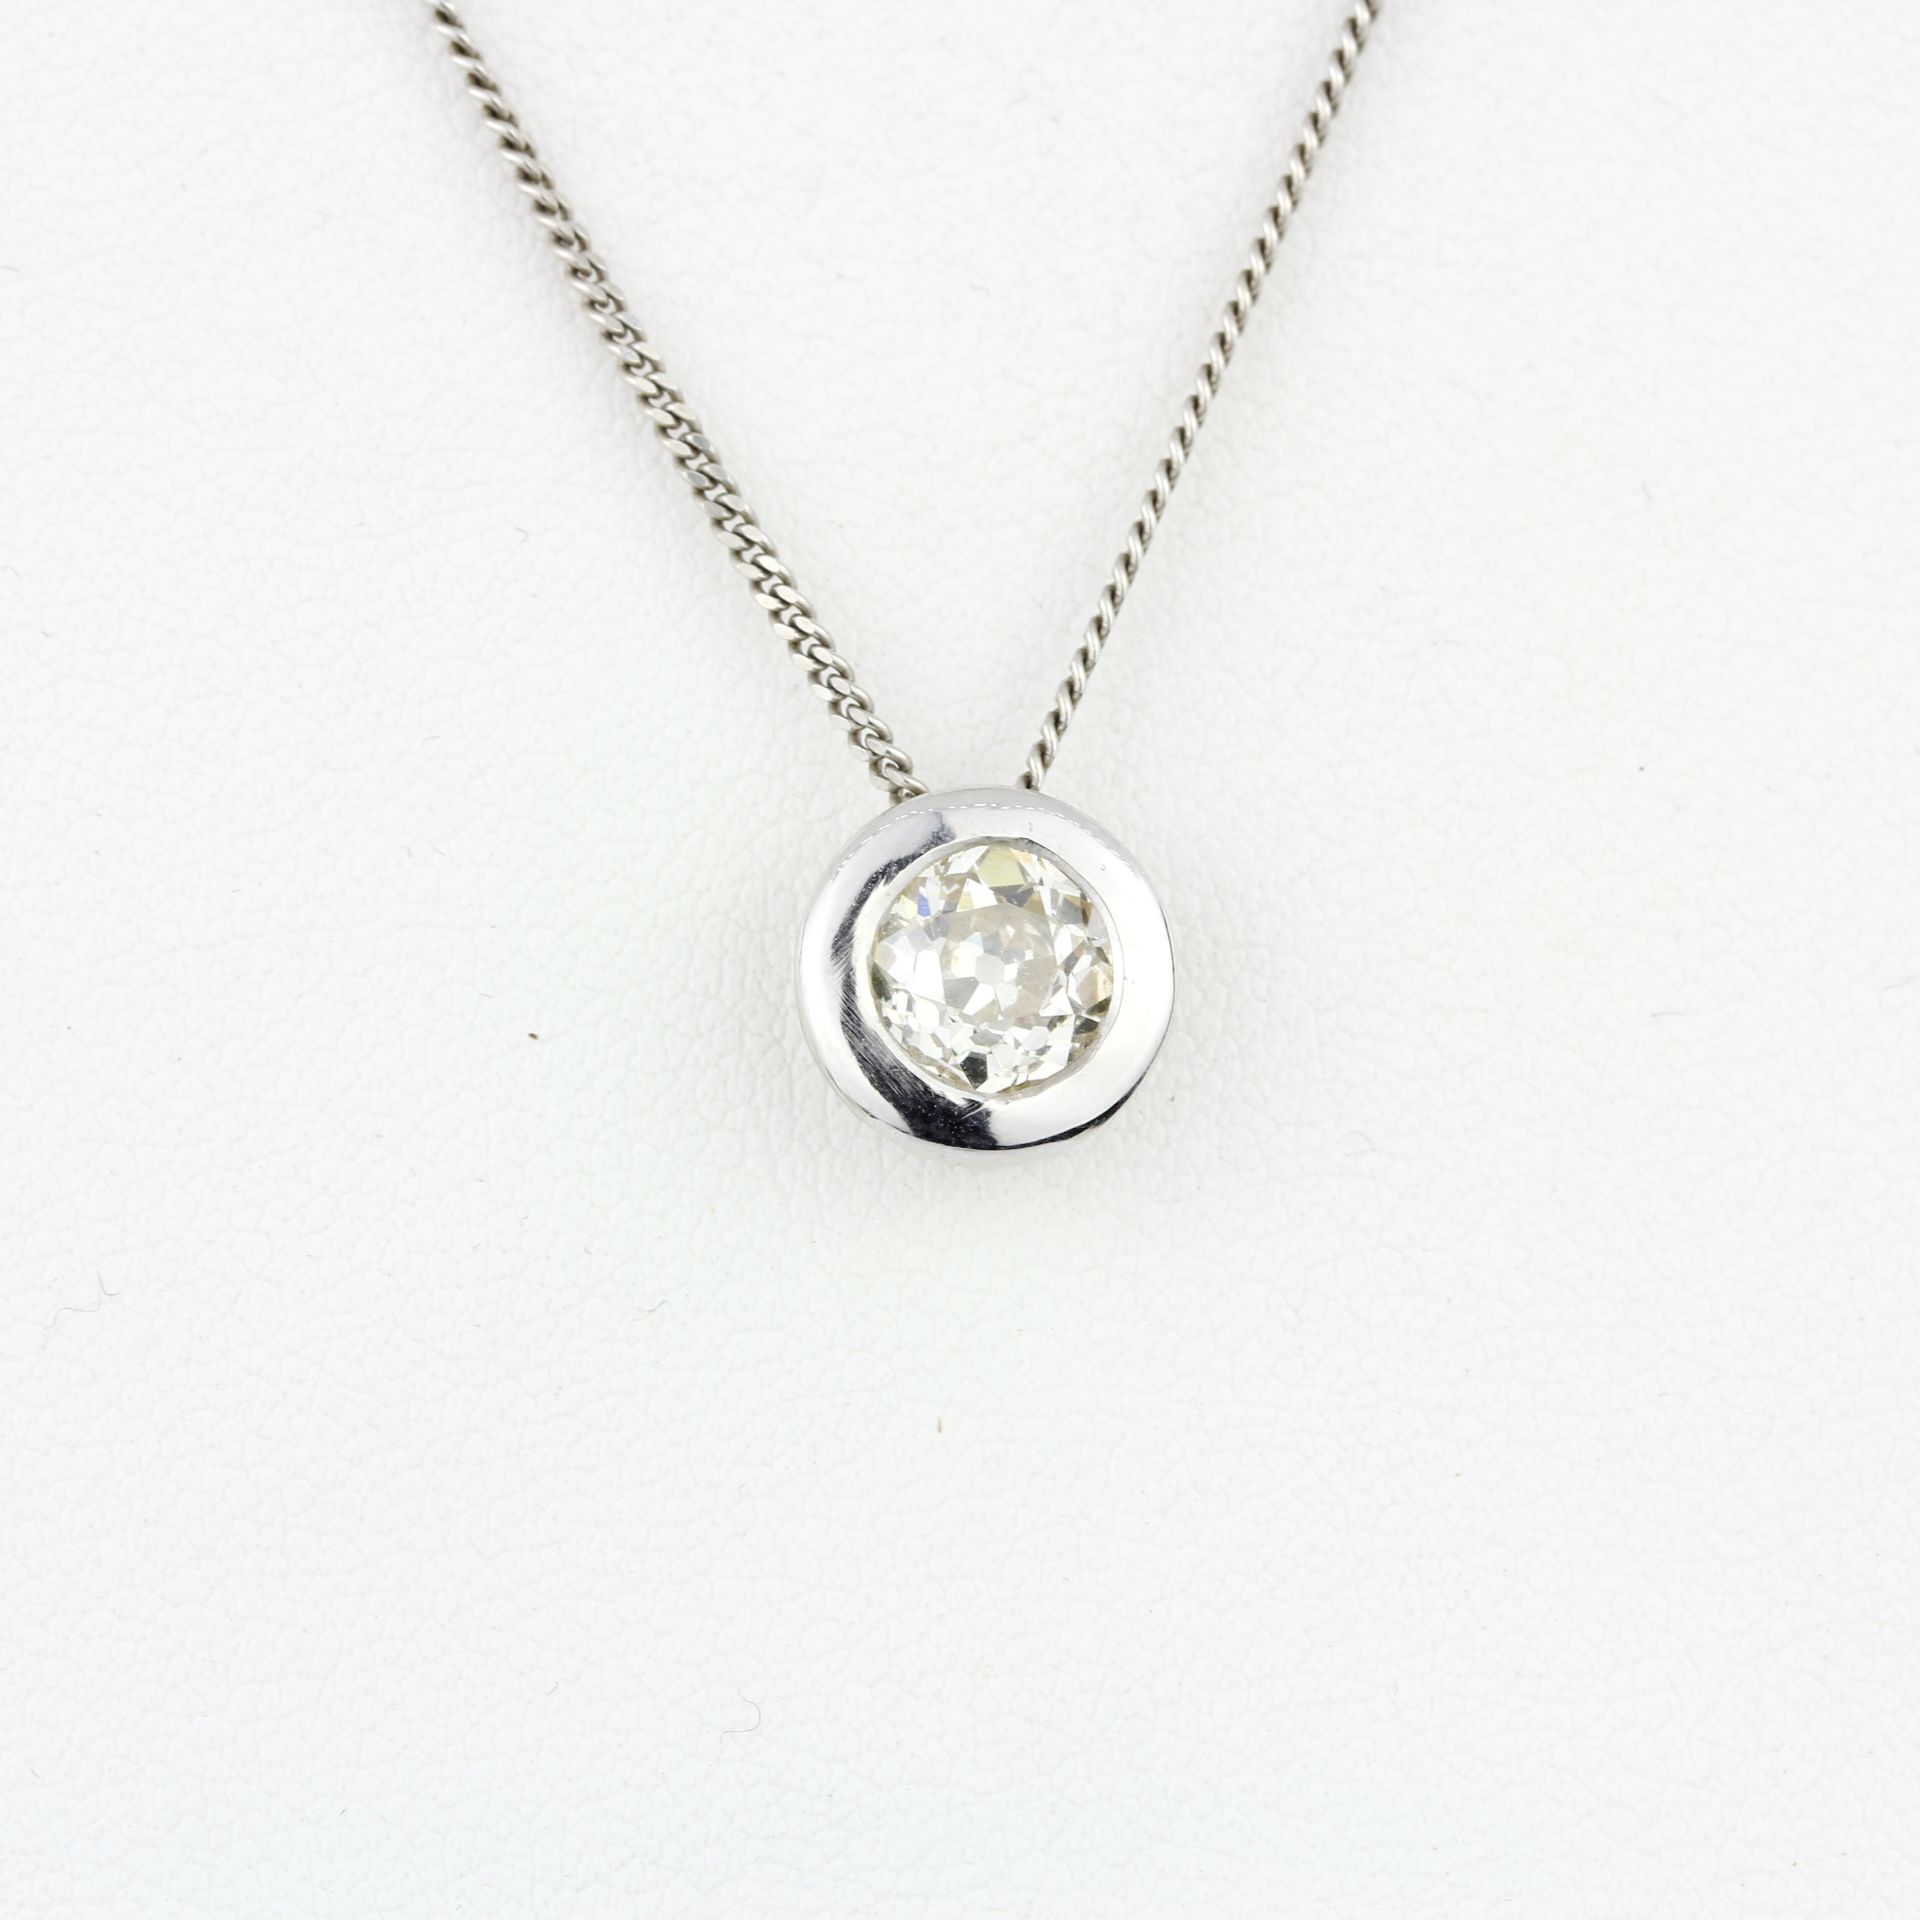 An 18ct white gold pendant set with and old brilliant cut diamond, approx. 0.90ct, clarity VS, - Image 2 of 3